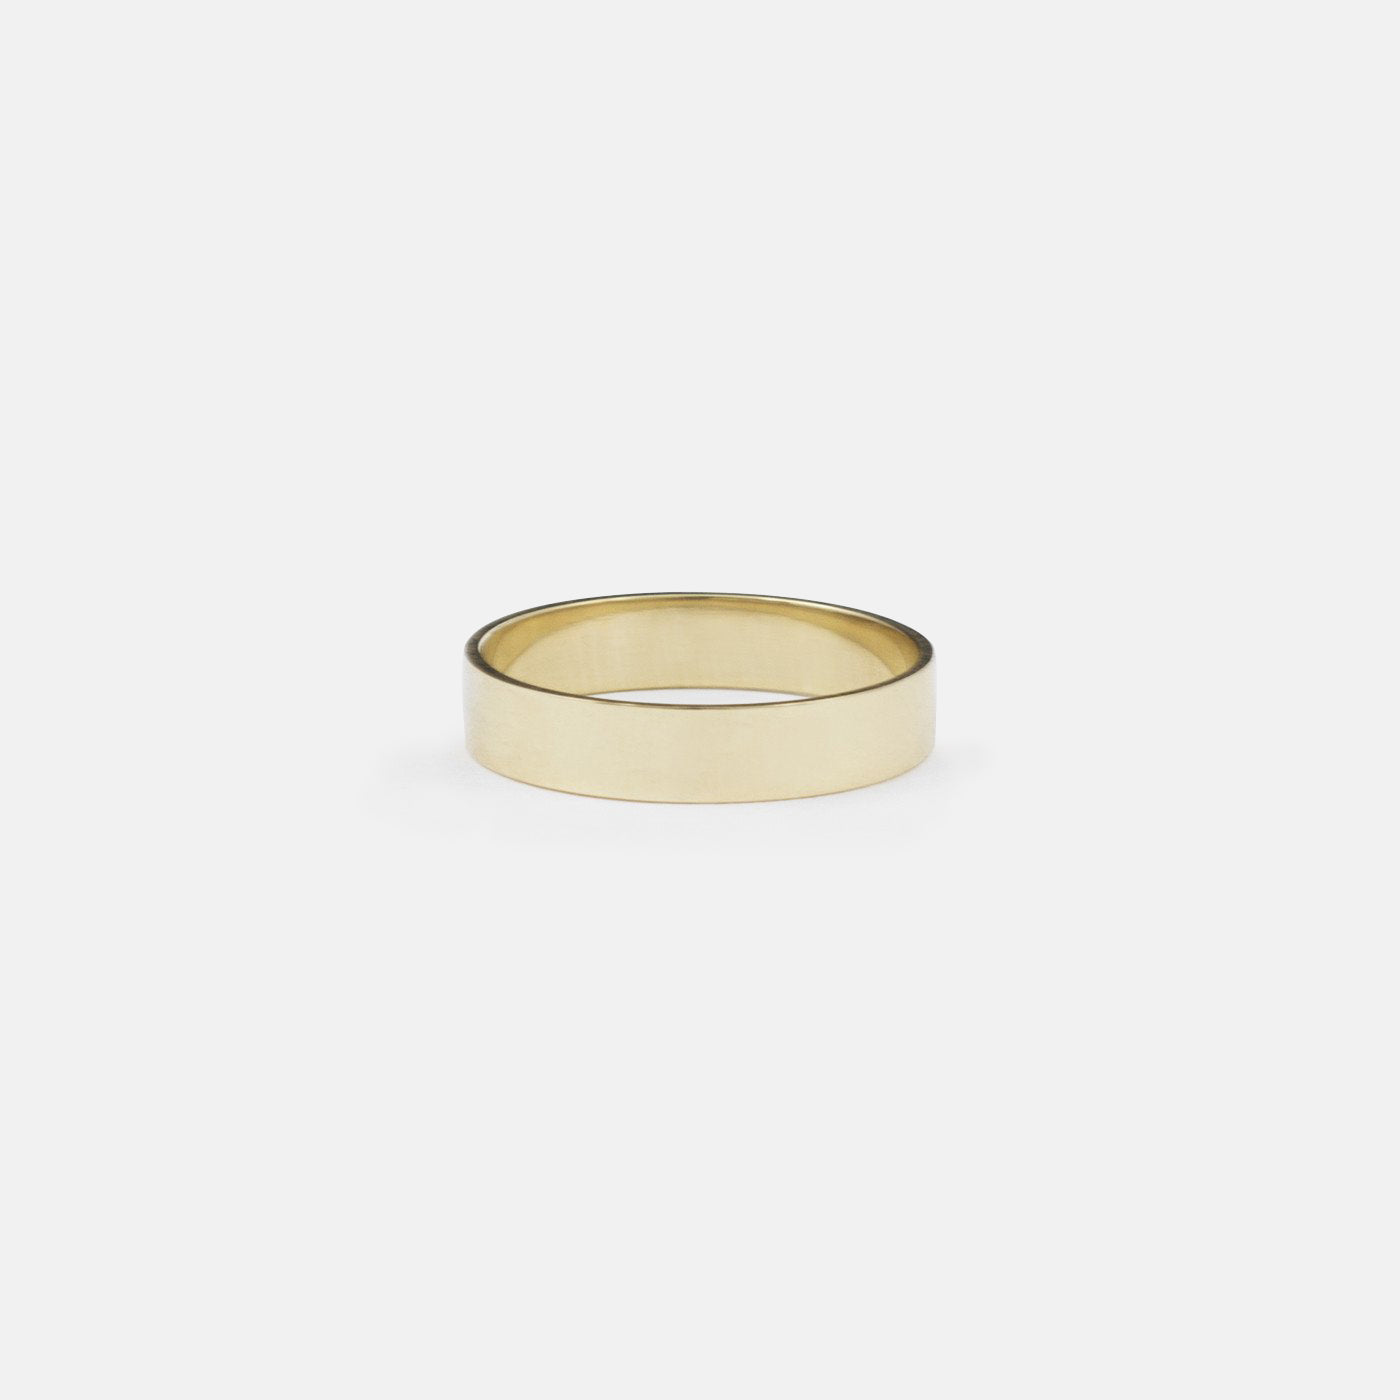 Reno Unisex Ring in 14k Gold By SHW Fine Jewelry NYC